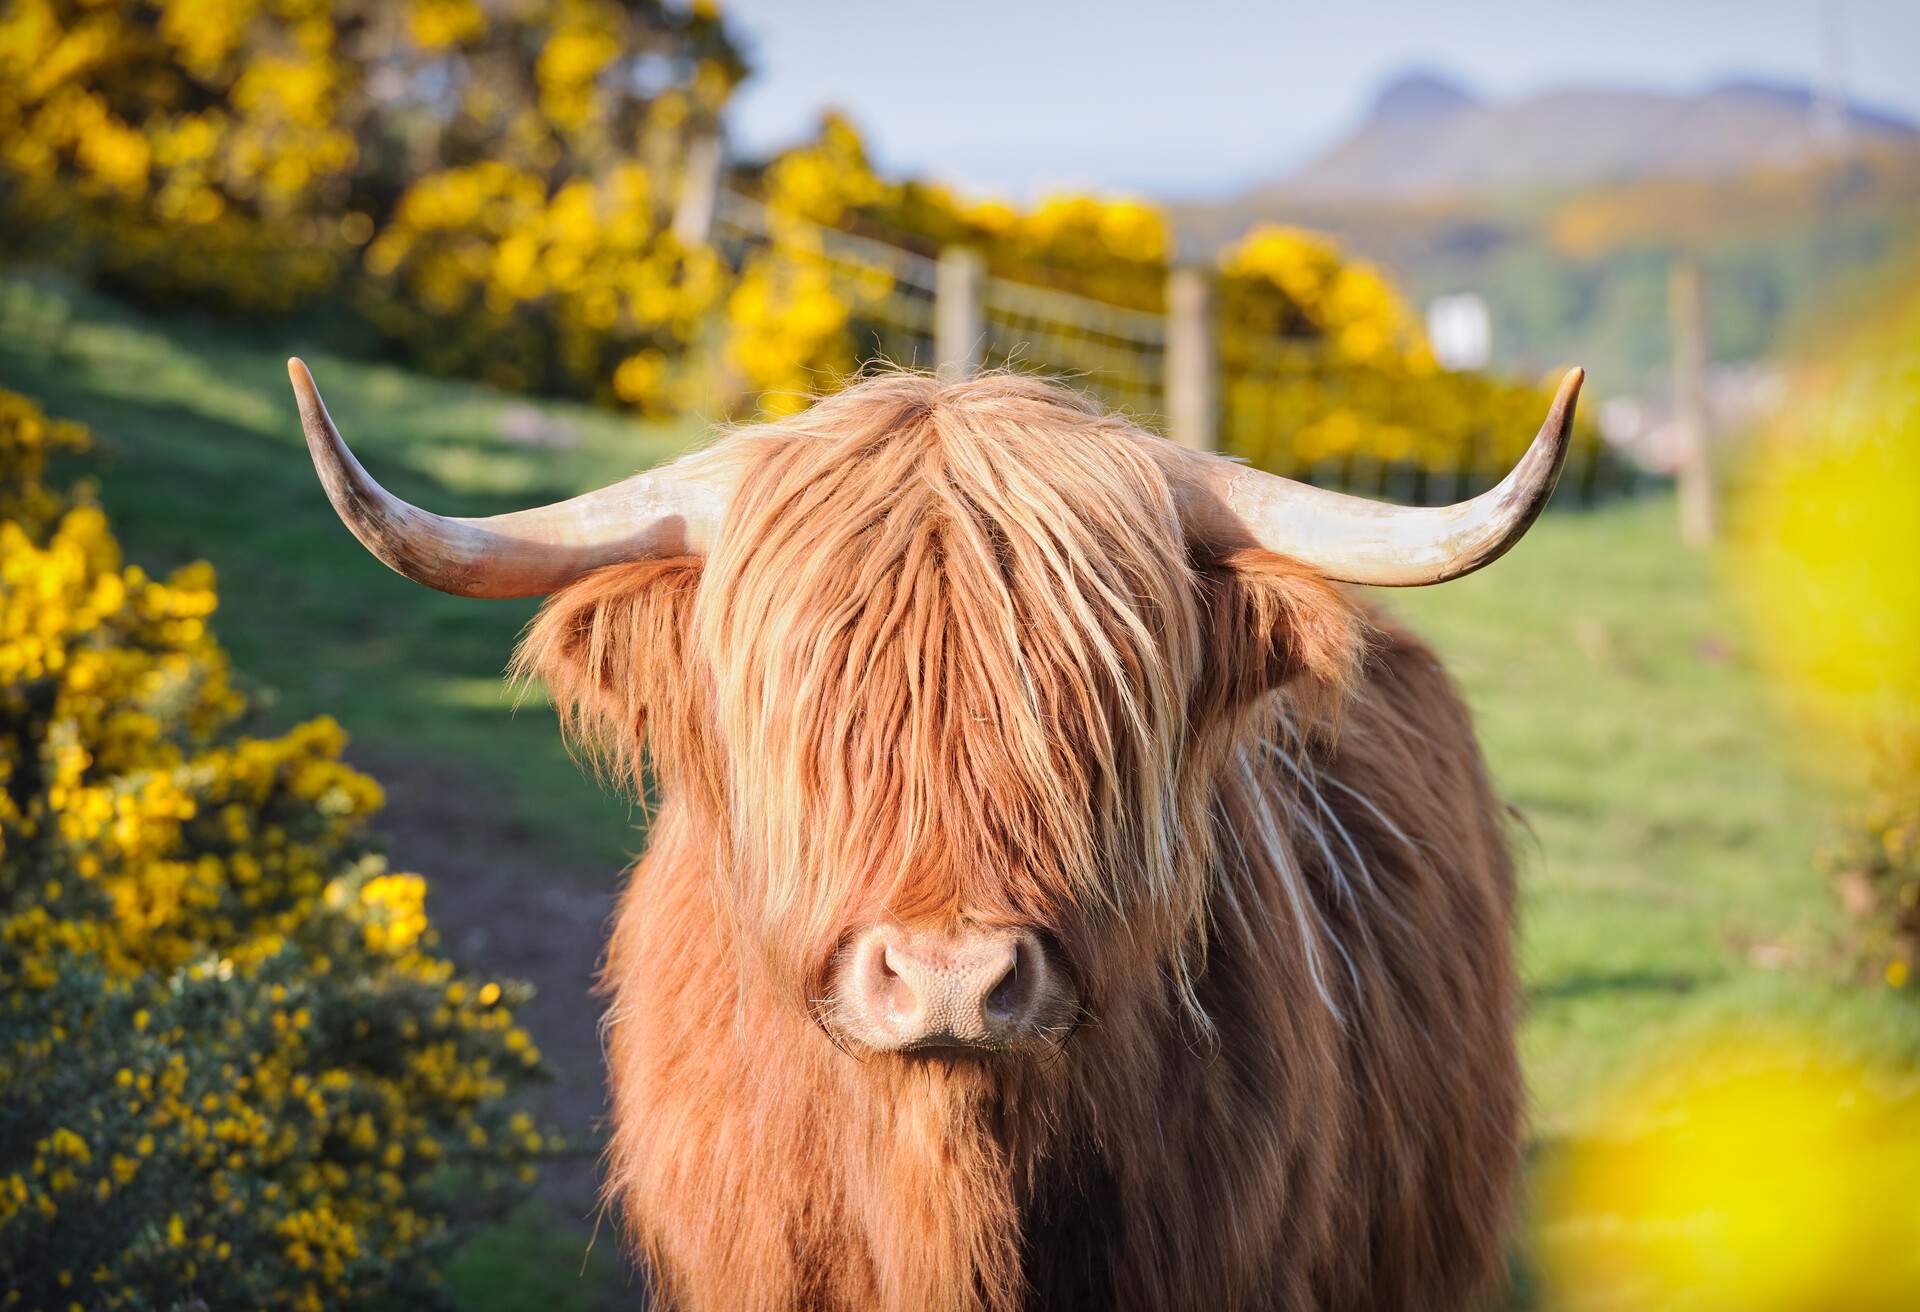 Highland Cow among flowering gorse in rural Scotland